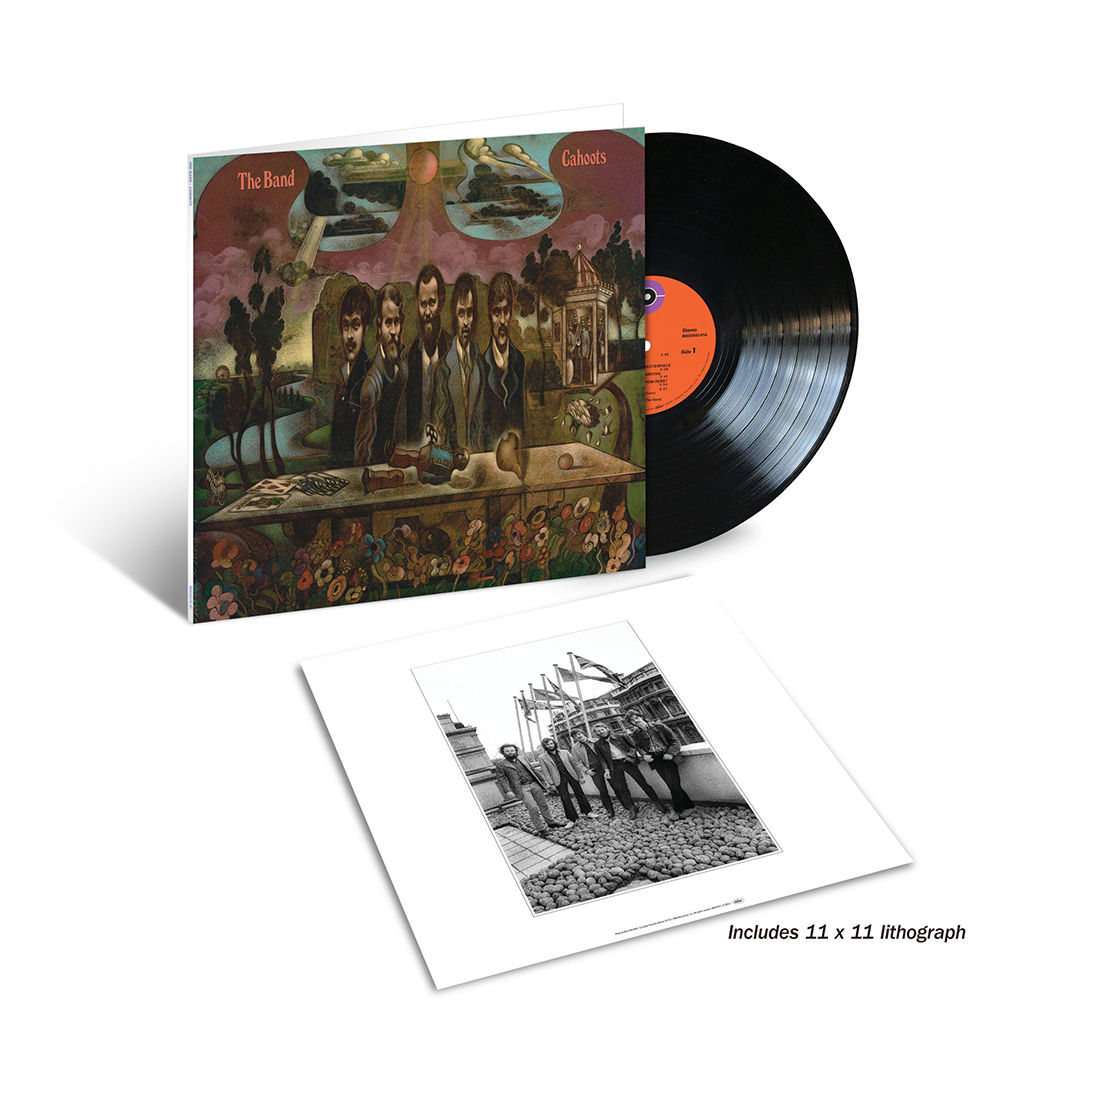 The Band - Cahoots - 50th Anniversary: Exclusive Gatefold Half-Speed Vinyl LP